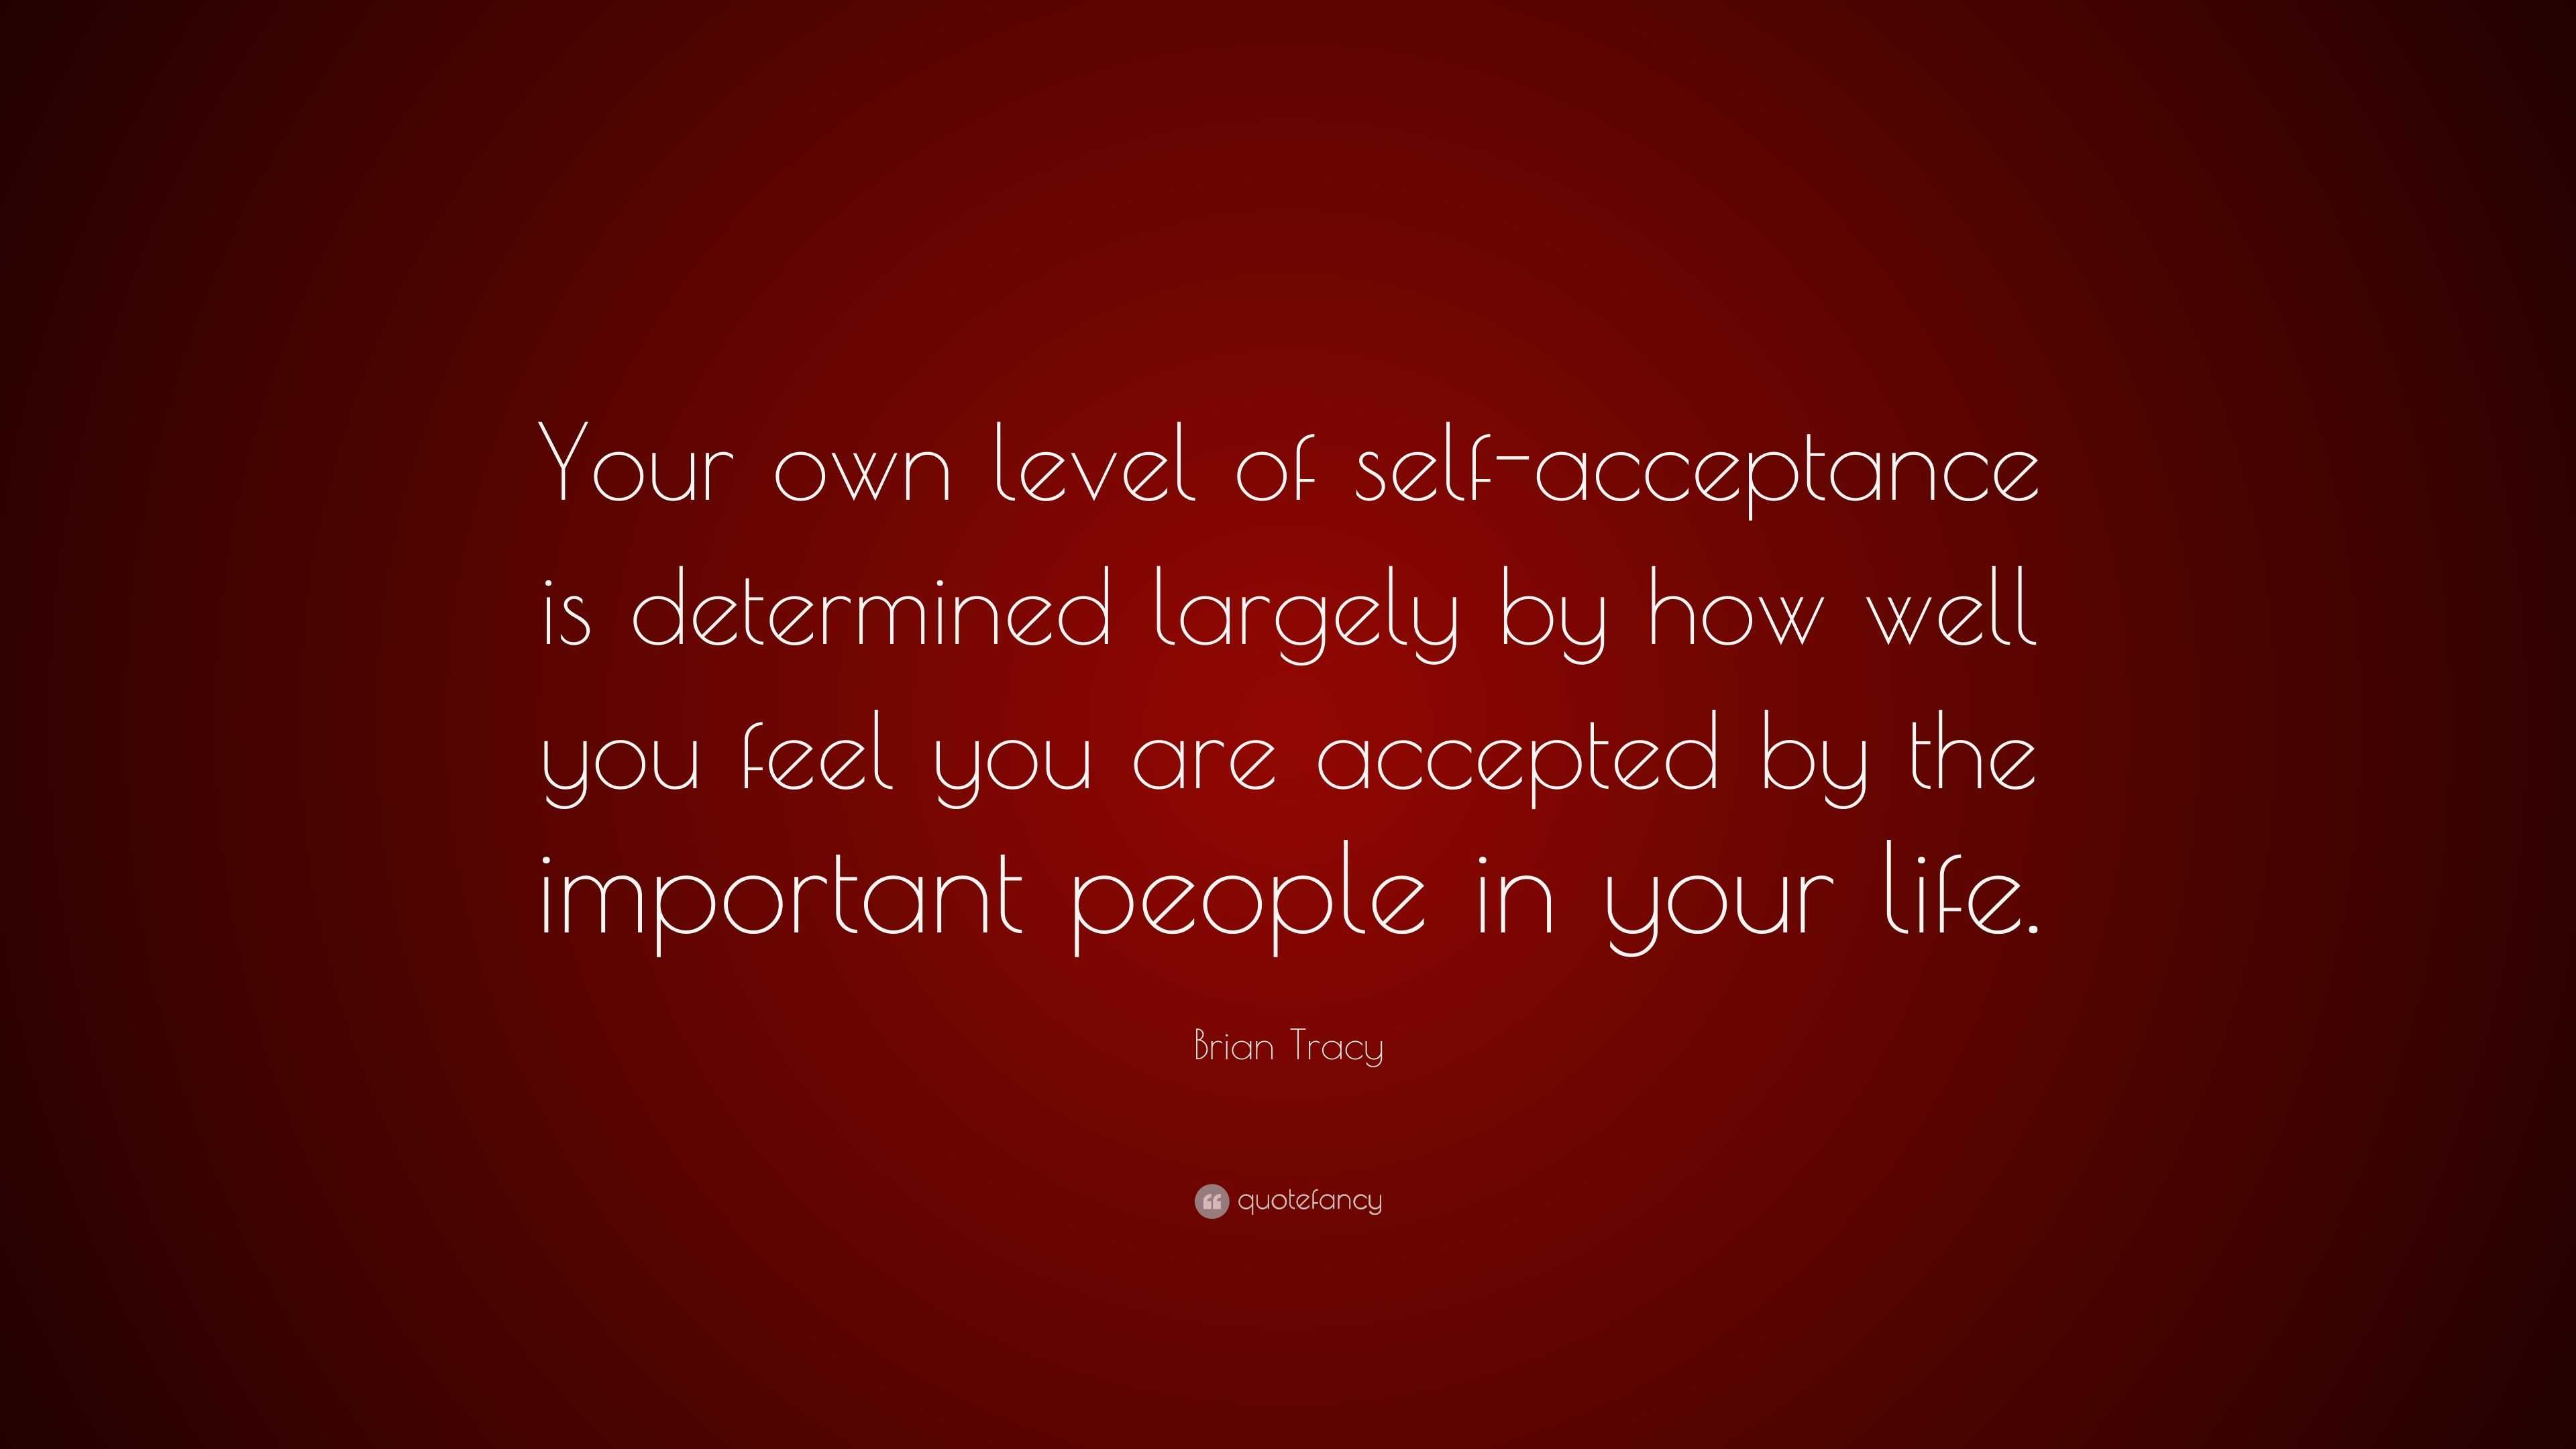 Brian Tracy Quote: “Your own level of self-acceptance is determined ...